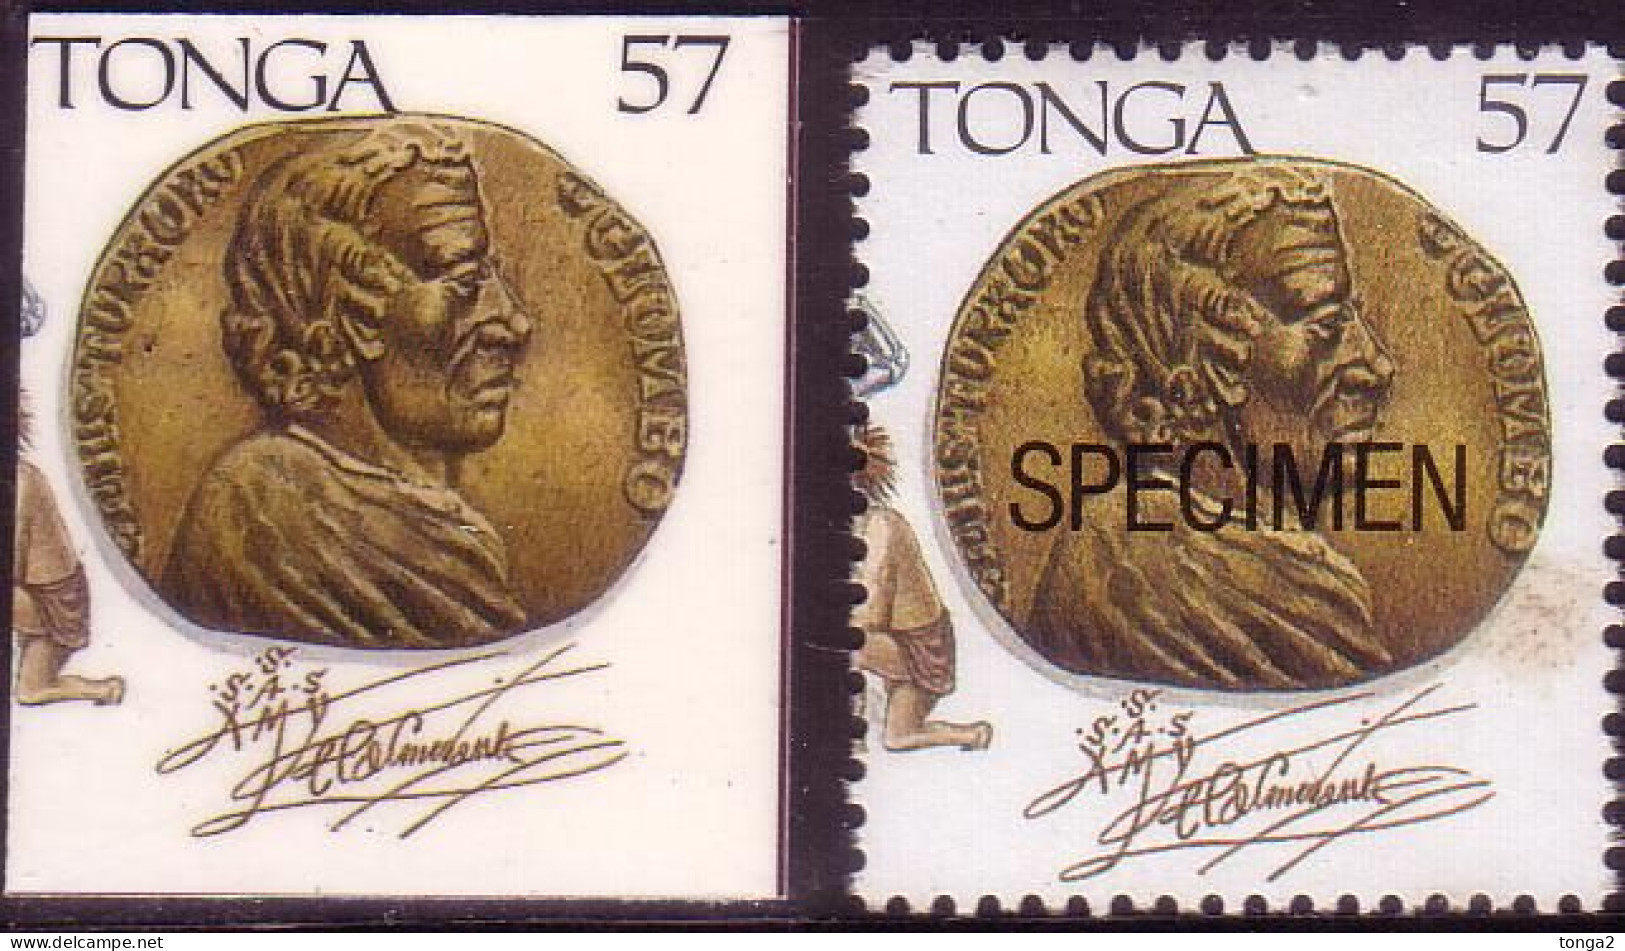 Tonga 1992 Cromalin Proof - Gold Medal Showing Columbus And His Signature - 4 Exist - Christopher Columbus